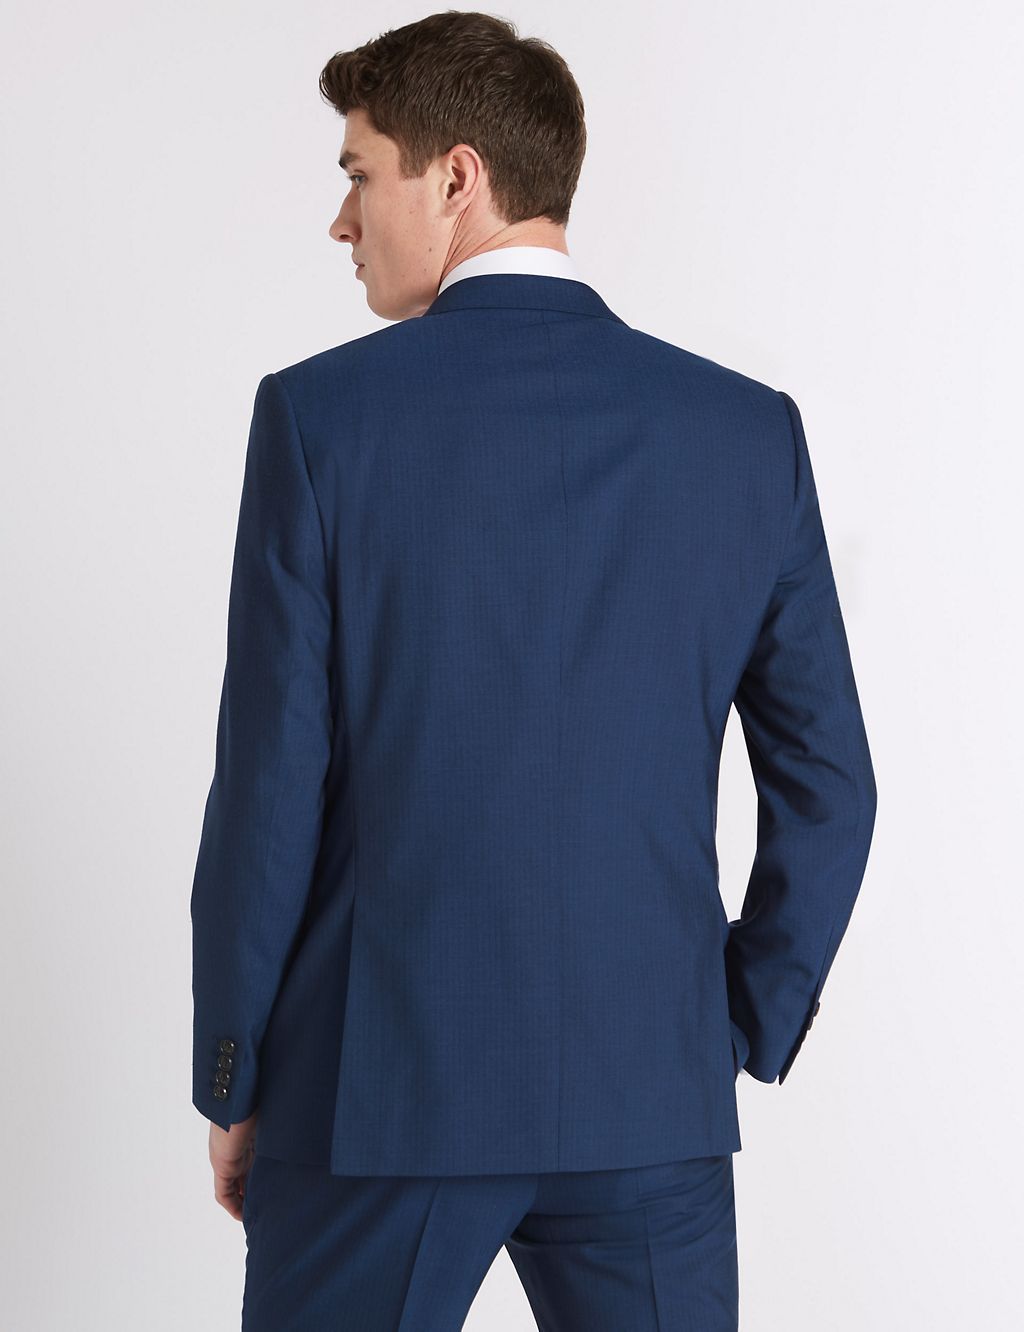 Blue Striped Tailored Fit Wool Jacket 8 of 8